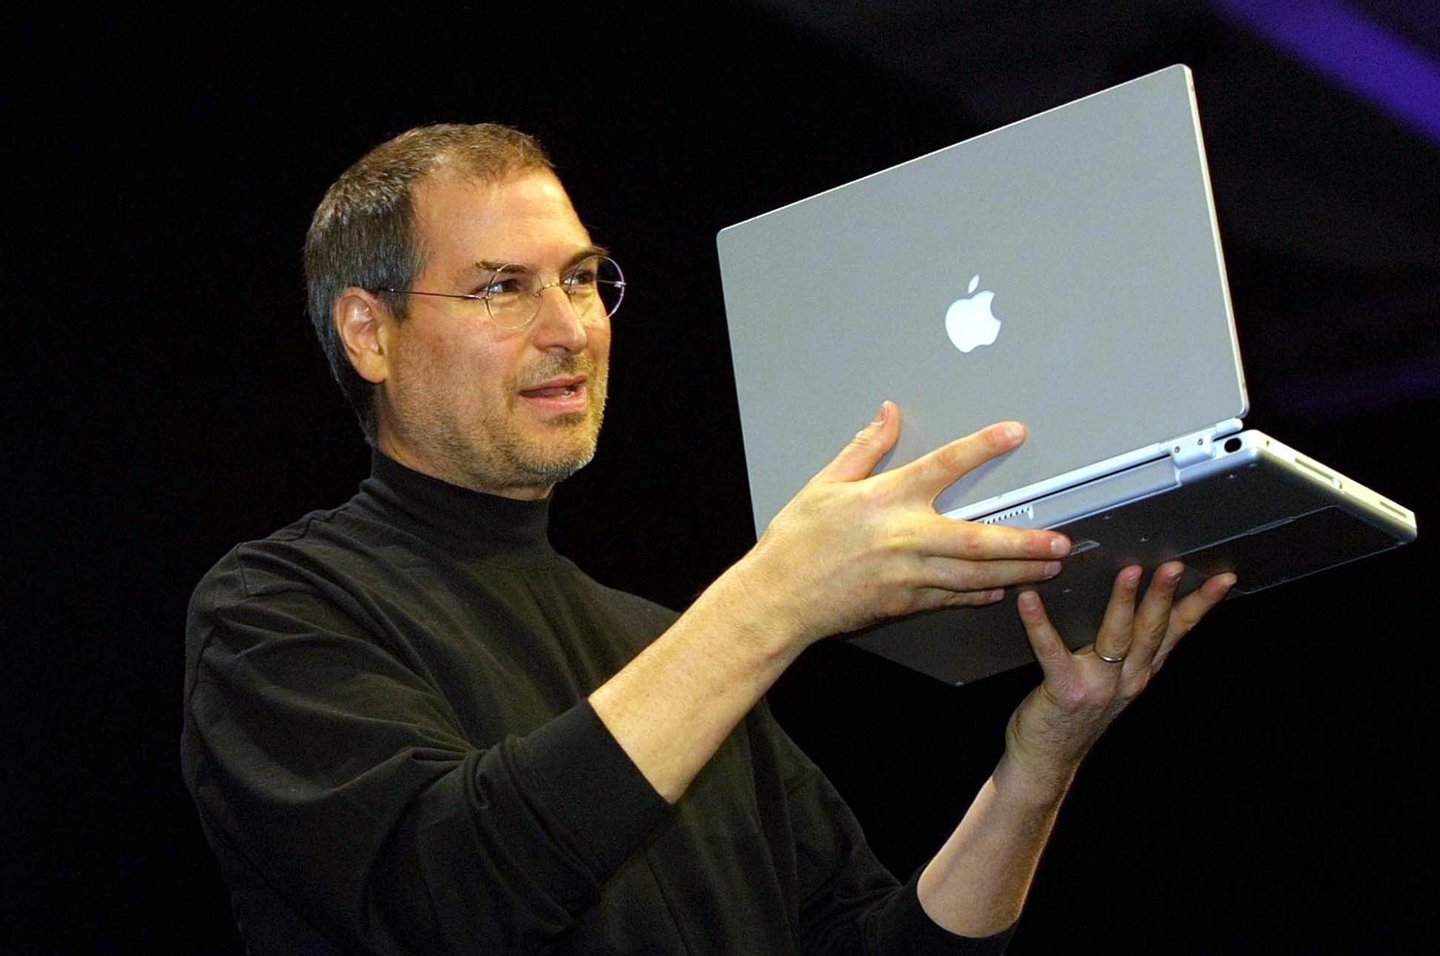 SAN FRANCISCO, UNITED STATES: Steve Jobs, CEO of Apple Computer unveils a new titanium G4 Powerbook with a 15.2 inch screen during his keynote address at the MacWorld Expo in San Francisco,CA, 09 January 2001. Jobs also announced new configurations of the G4 desktop Macs as well as new audio and DVD software. AFP PHOTO/John G. MABANGLO (Photo credit should read JOHN G. MABANGLO/AFP/Getty Images)